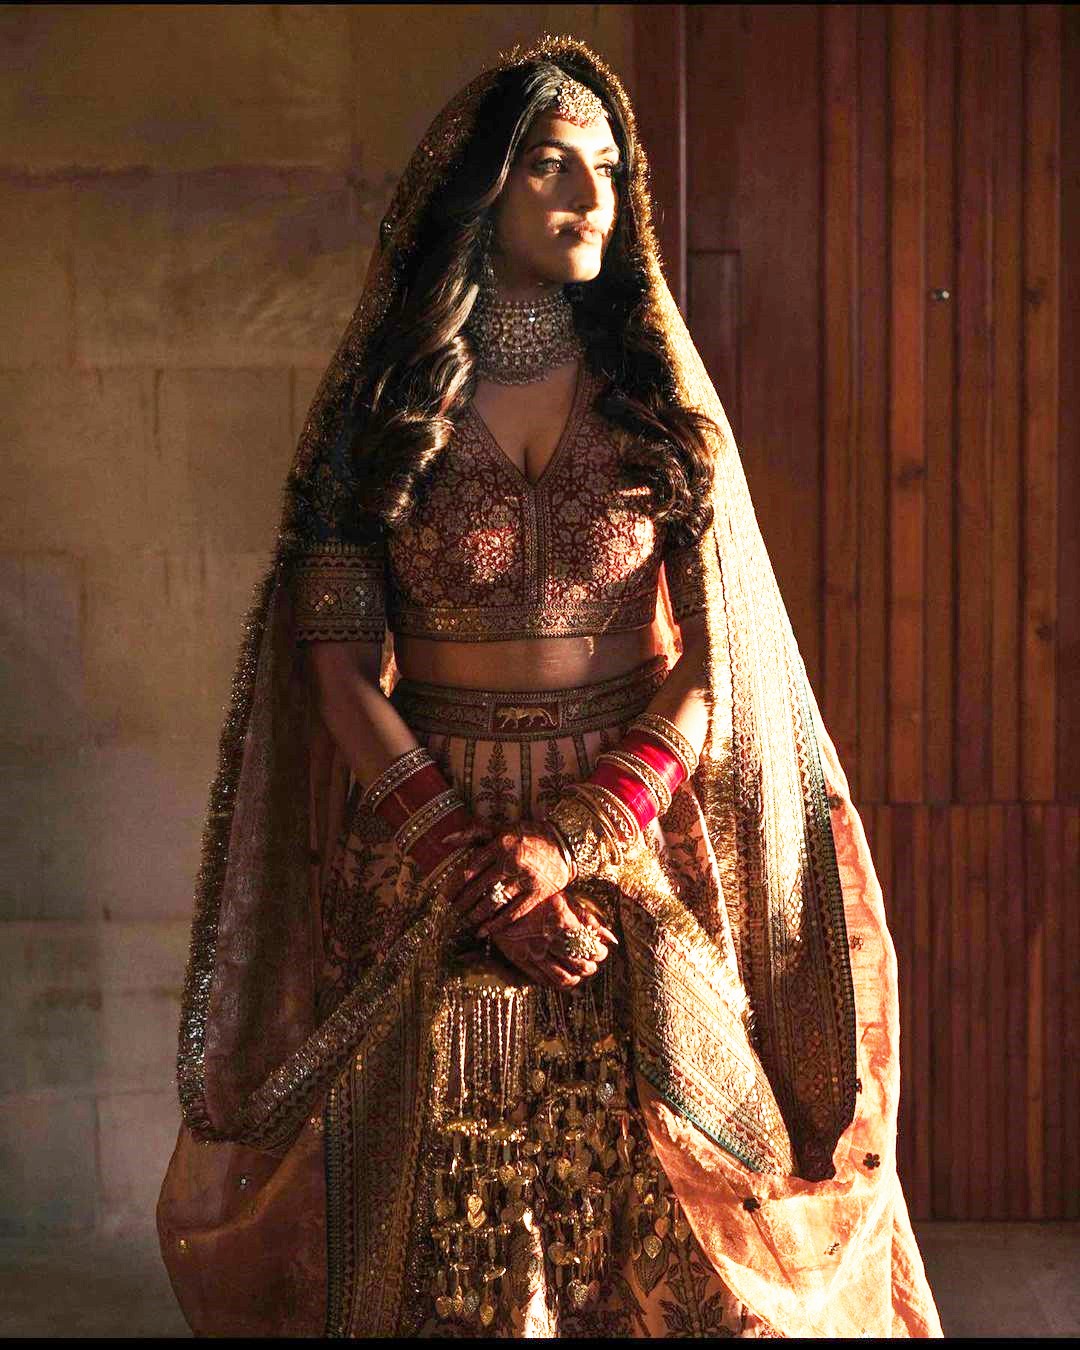 Mrunal Thakur Exudes Elegance And Royalty With Stunning Bridal Photoshoot,  Check Out The Diva's Gorgeous Pictures - News18